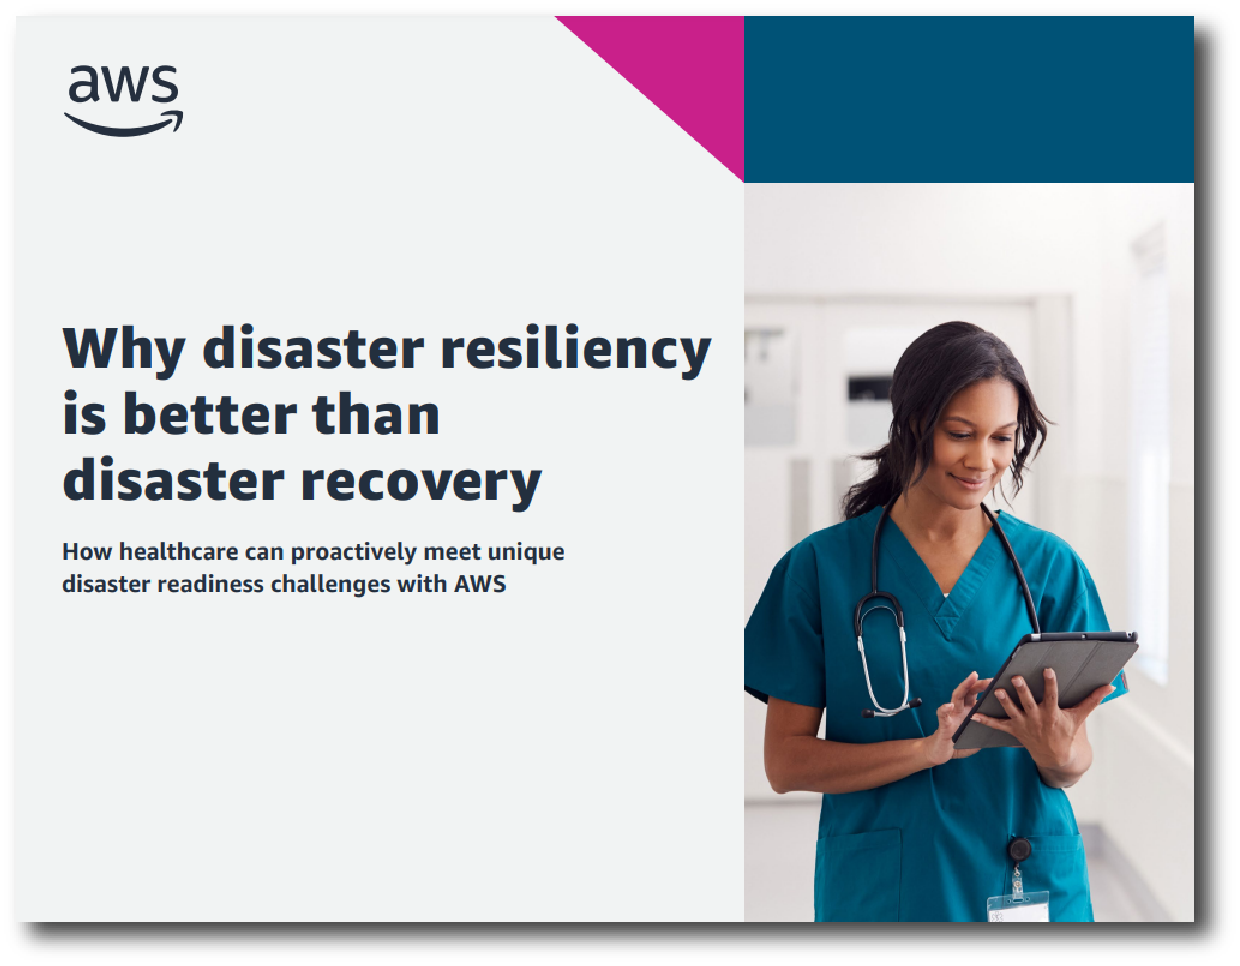 IMG-WP-AWS-2022-A4H disaster resiliency ebook@2x.png